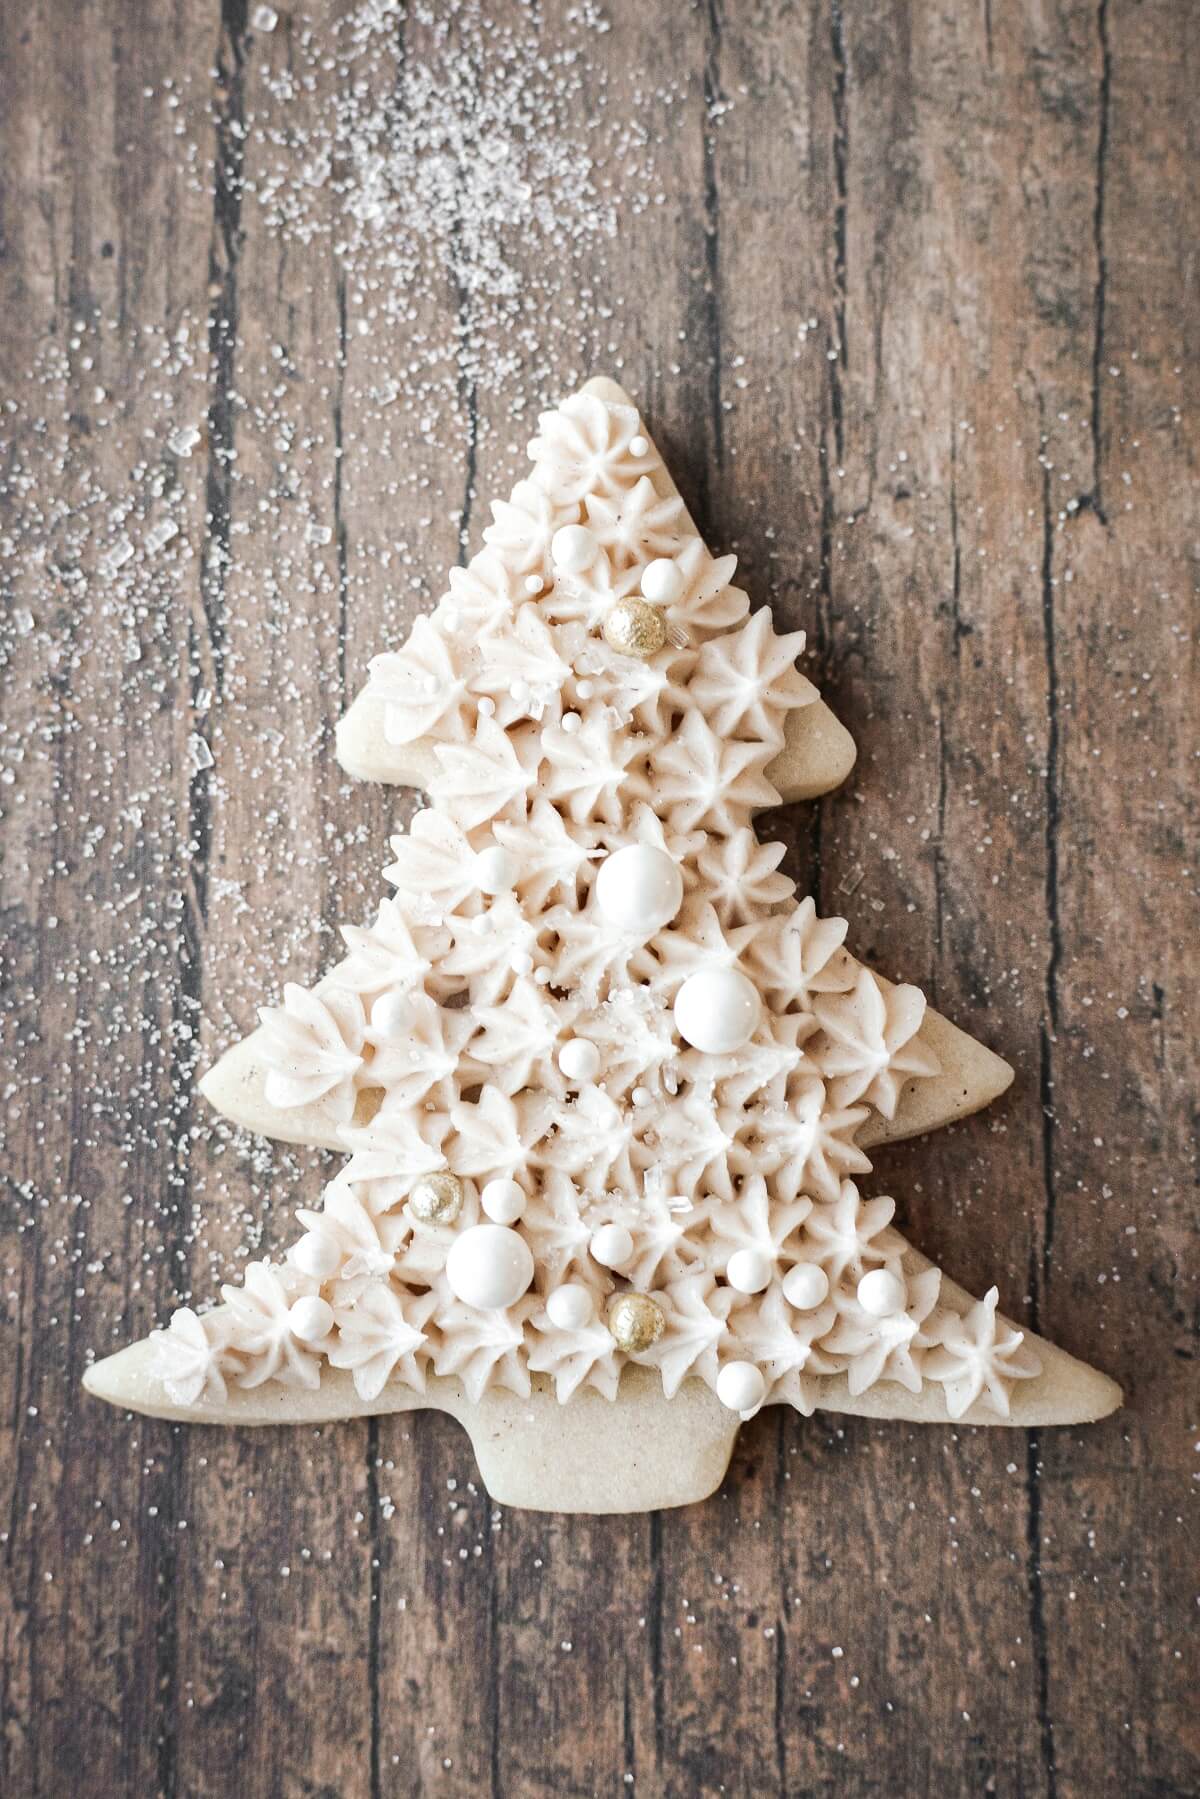 A Christmas tree cookie with buttercream piped in stars and decorated with sugar pearls.